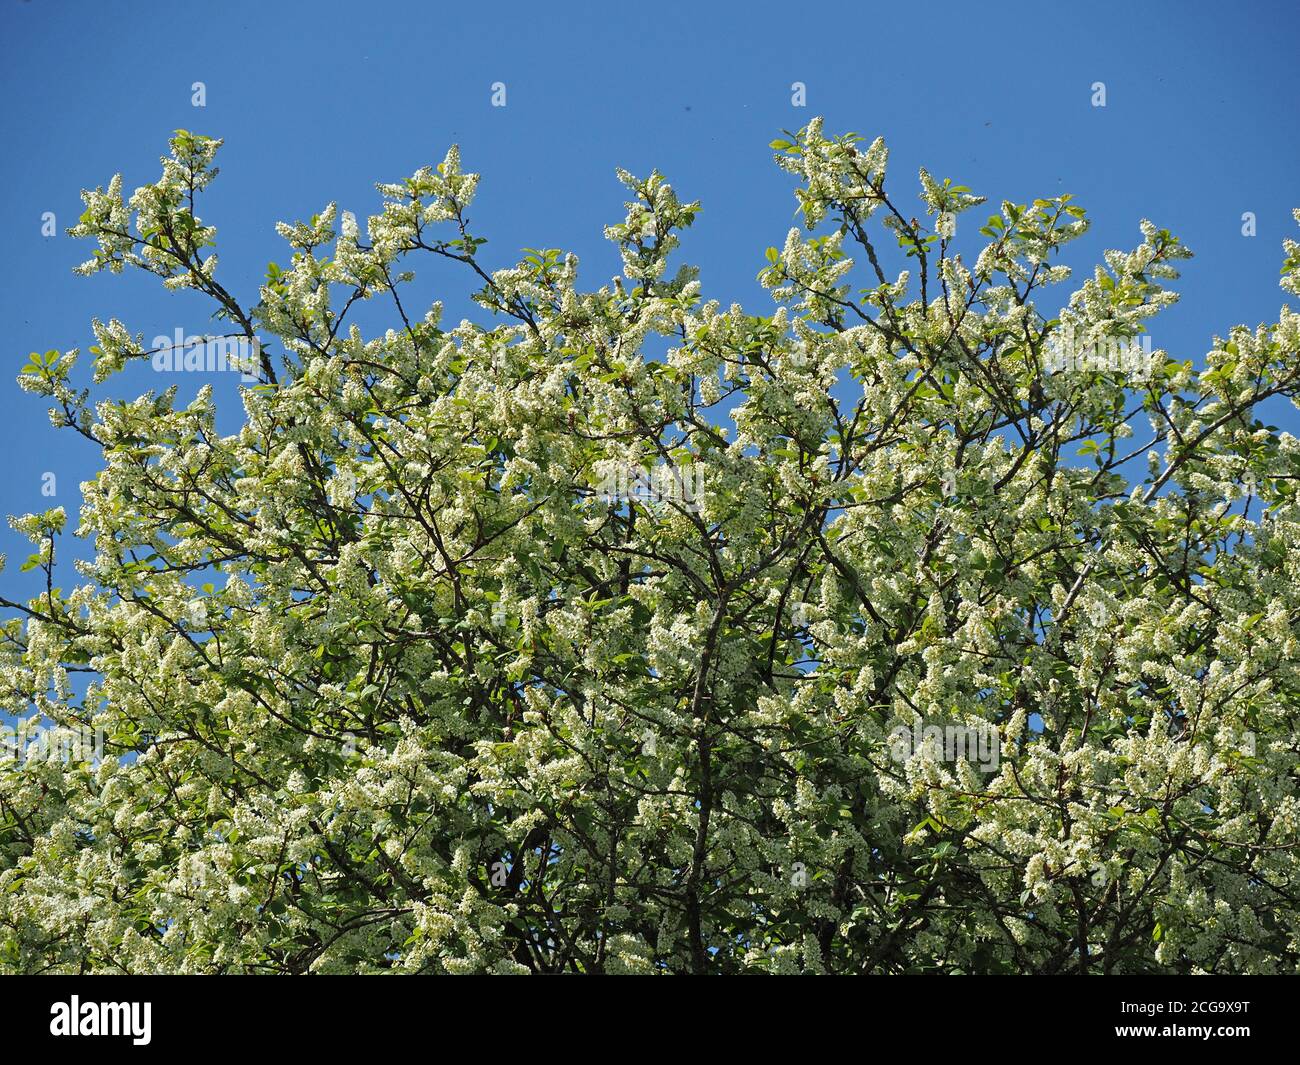 massed panicles of profuse white, sweet-scented blossom of European Bird Cherry (Prunus padus) make green & white spectacle in Cumbria, England, UK Stock Photo